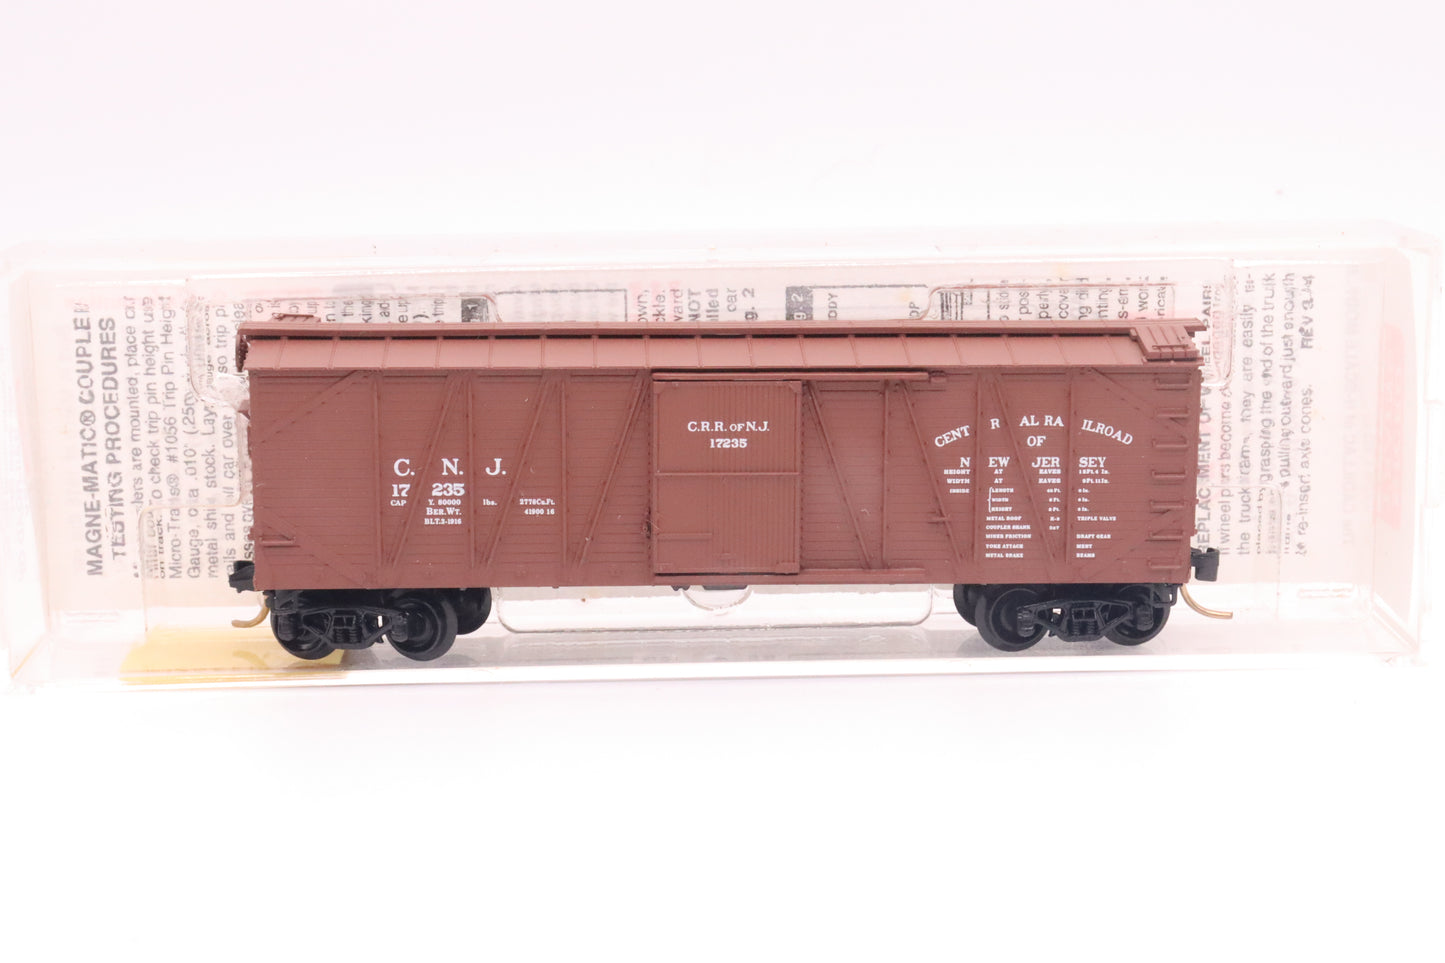 MTL-28040 - 40' Outside-Braced Boxcar with Single Door - Central Railroad of New Jersey - CNJ-17235